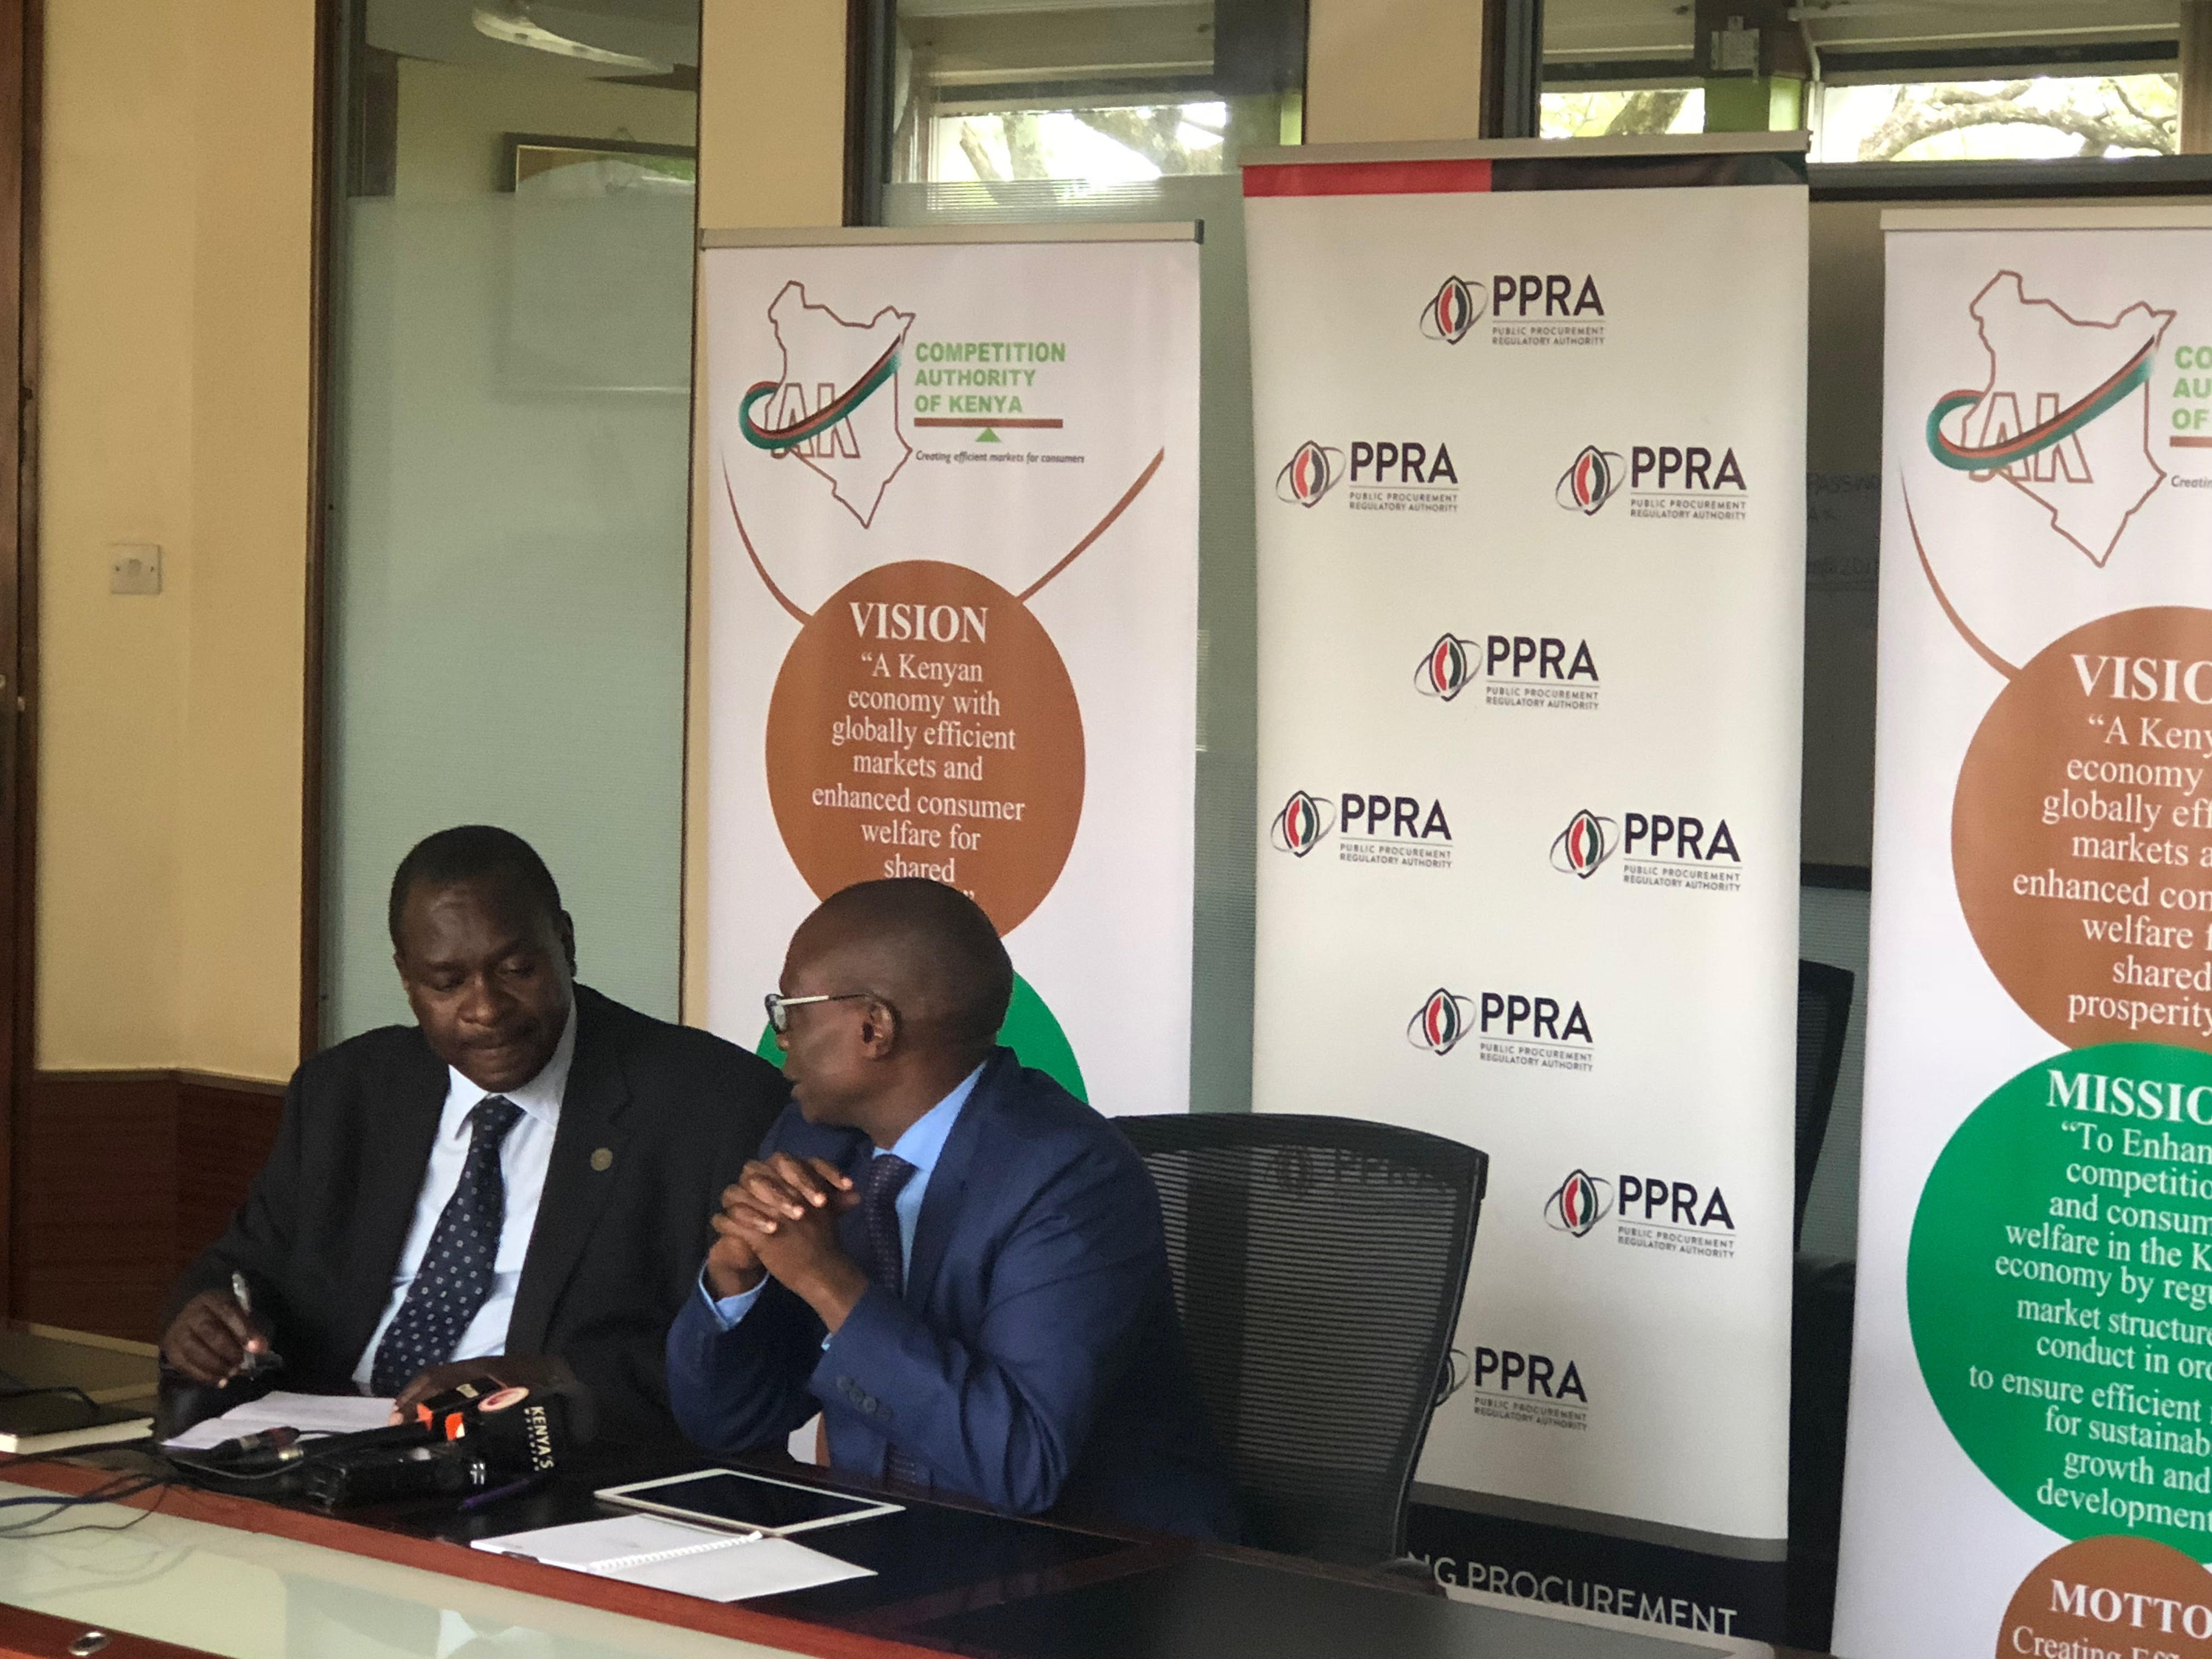 MoU signing between the Competition Authority of Kenya (CAK) and Public Procurement Regulatory Authority (PPRA) – June 2018